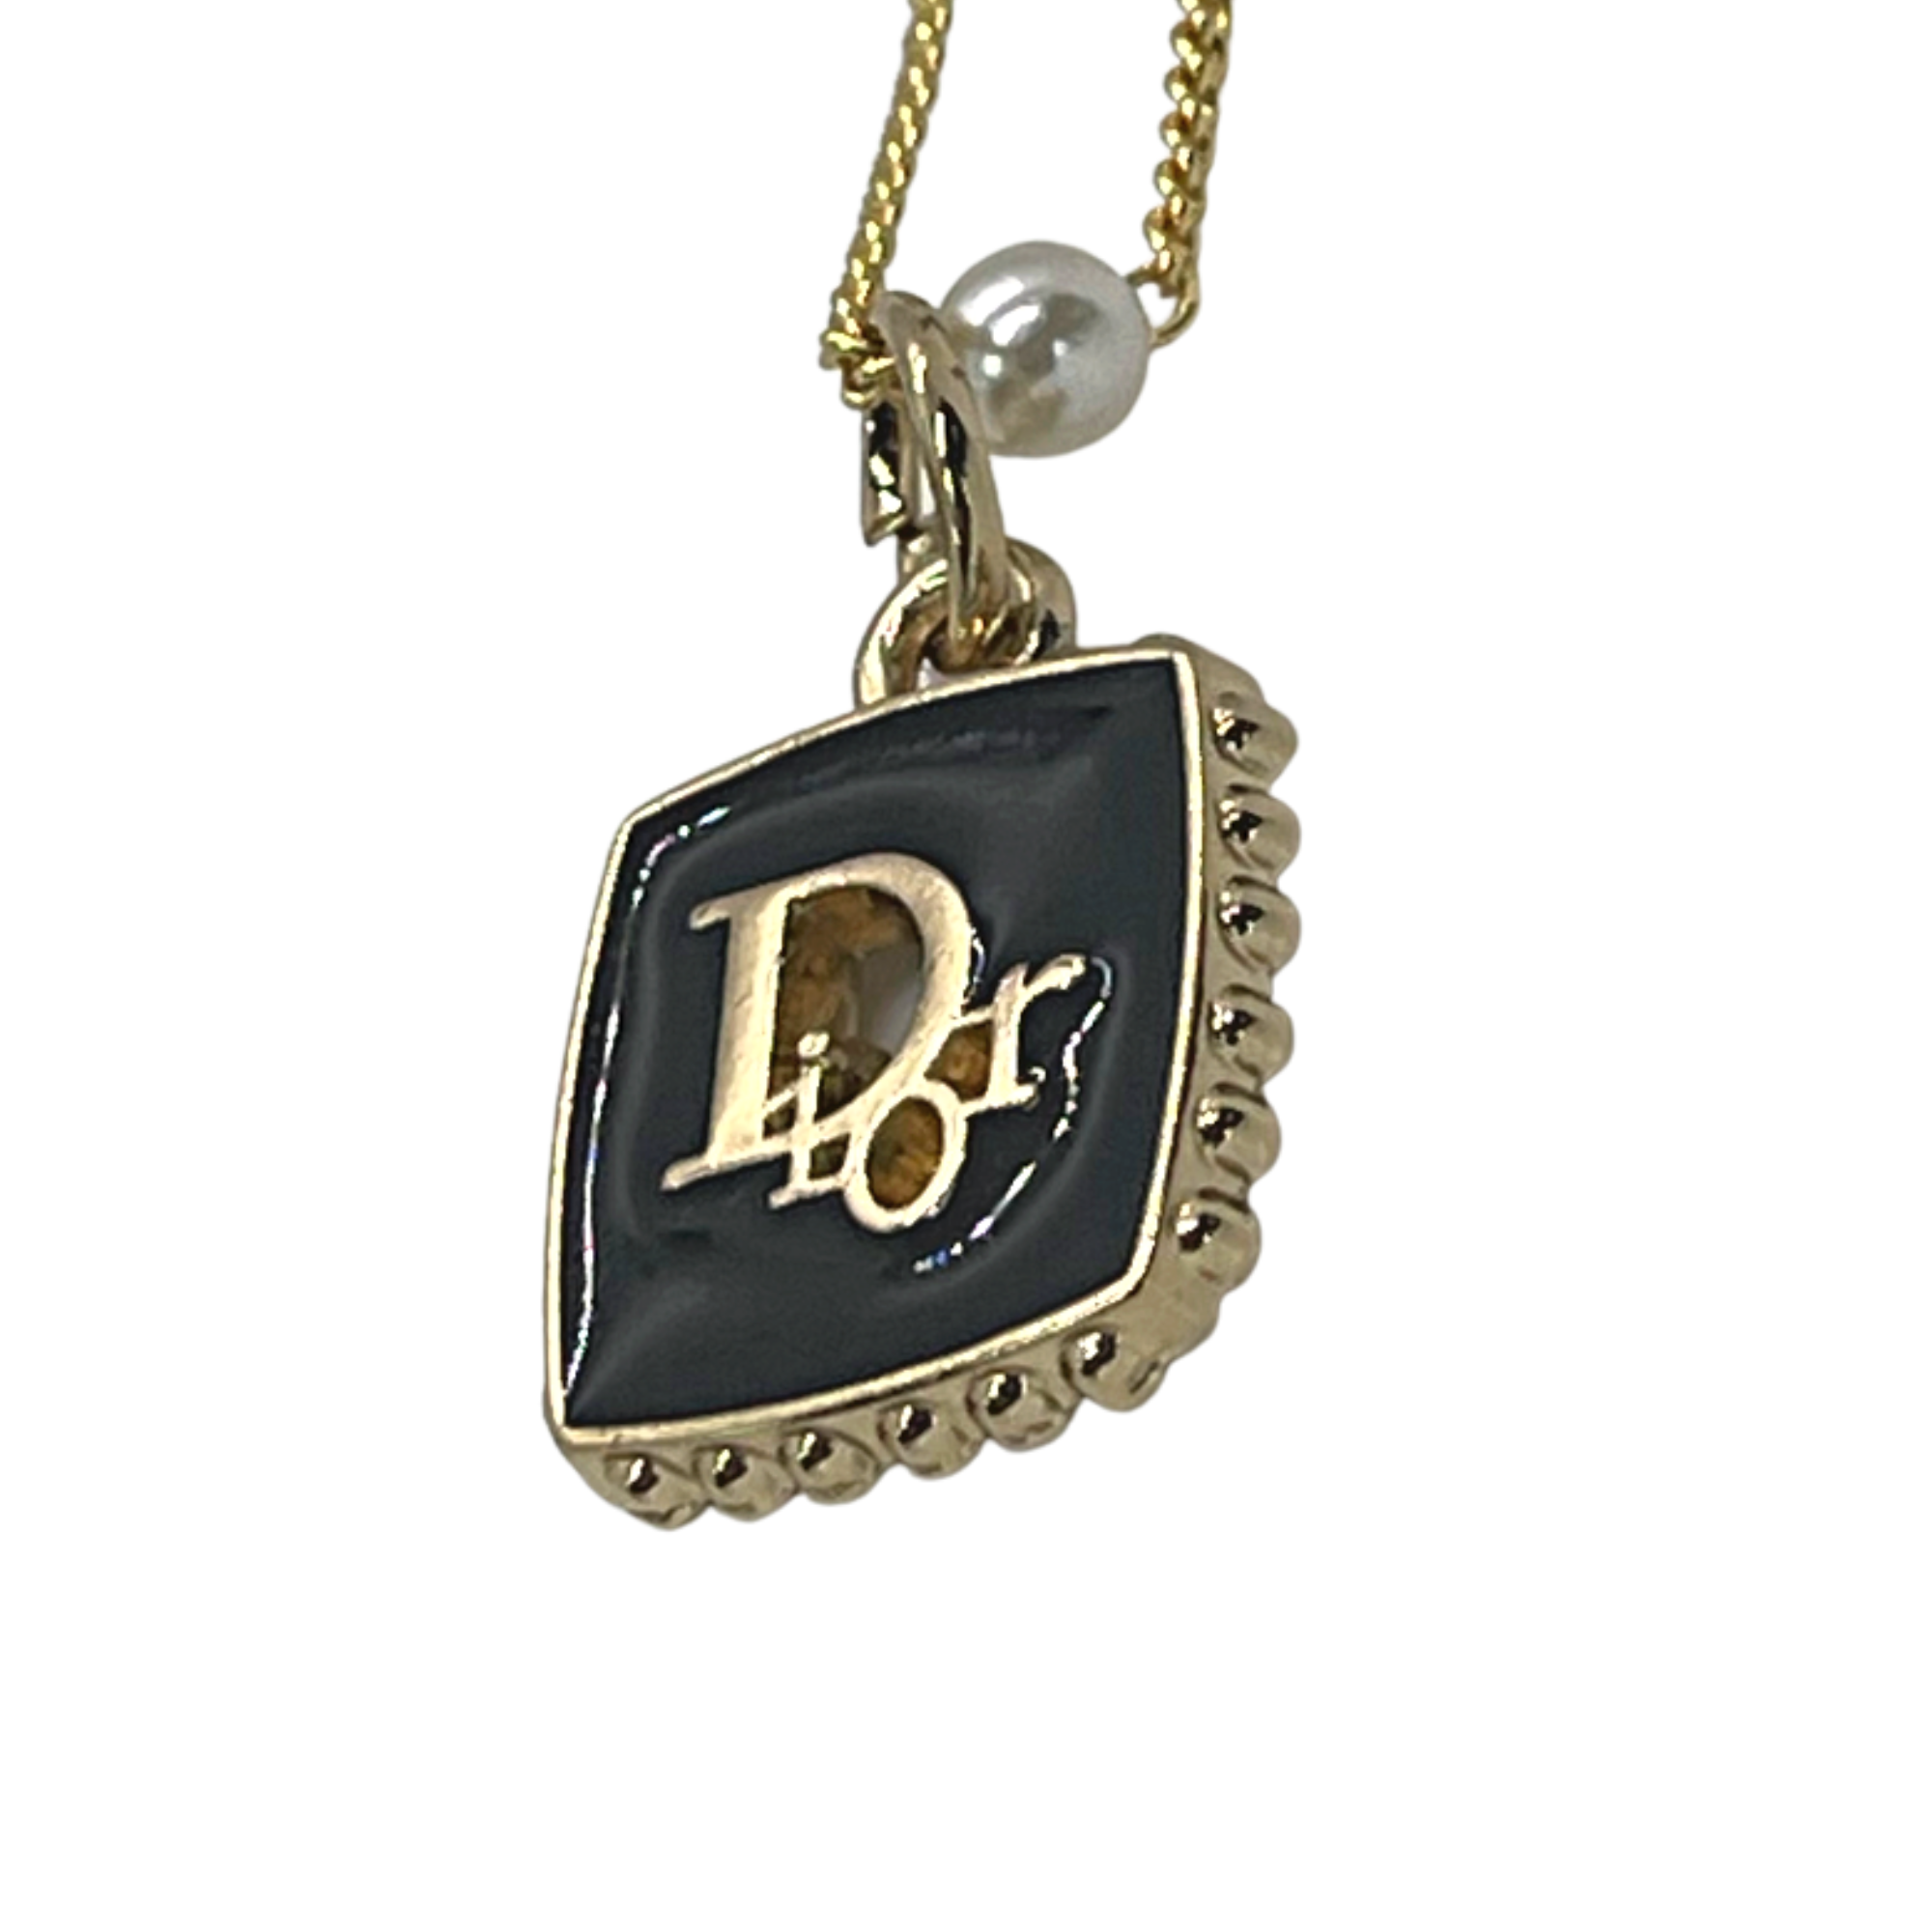 Child's 050 Gauge Figaro Chain Necklace in 14K Hollow Gold - 15